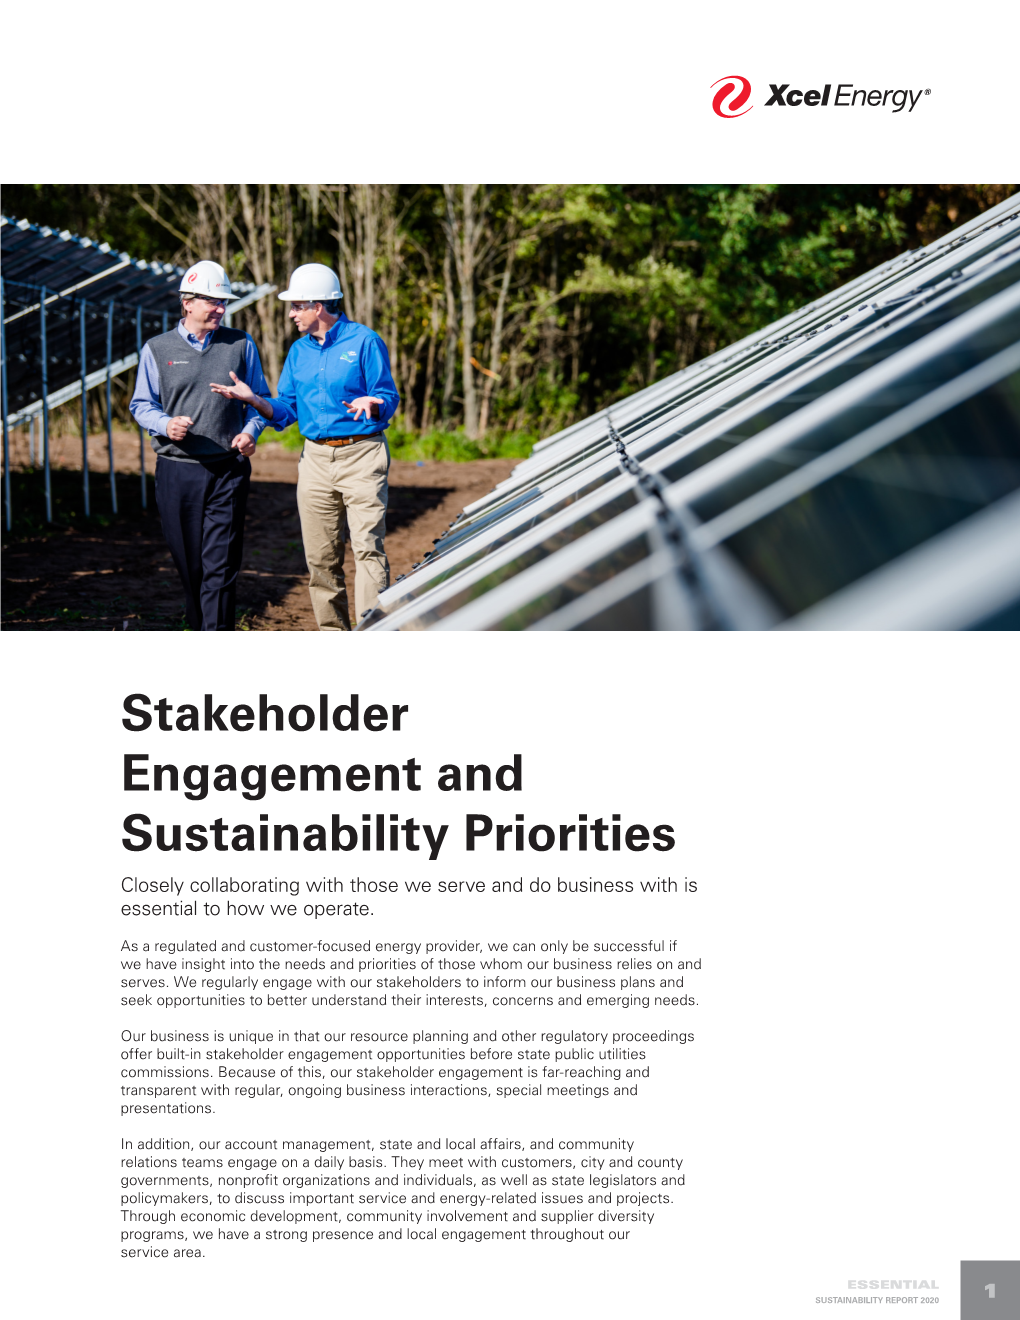 Stakeholder Engagement and Sustainability Priorities Closely Collaborating with Those We Serve and Do Business with Is Essential to How We Operate